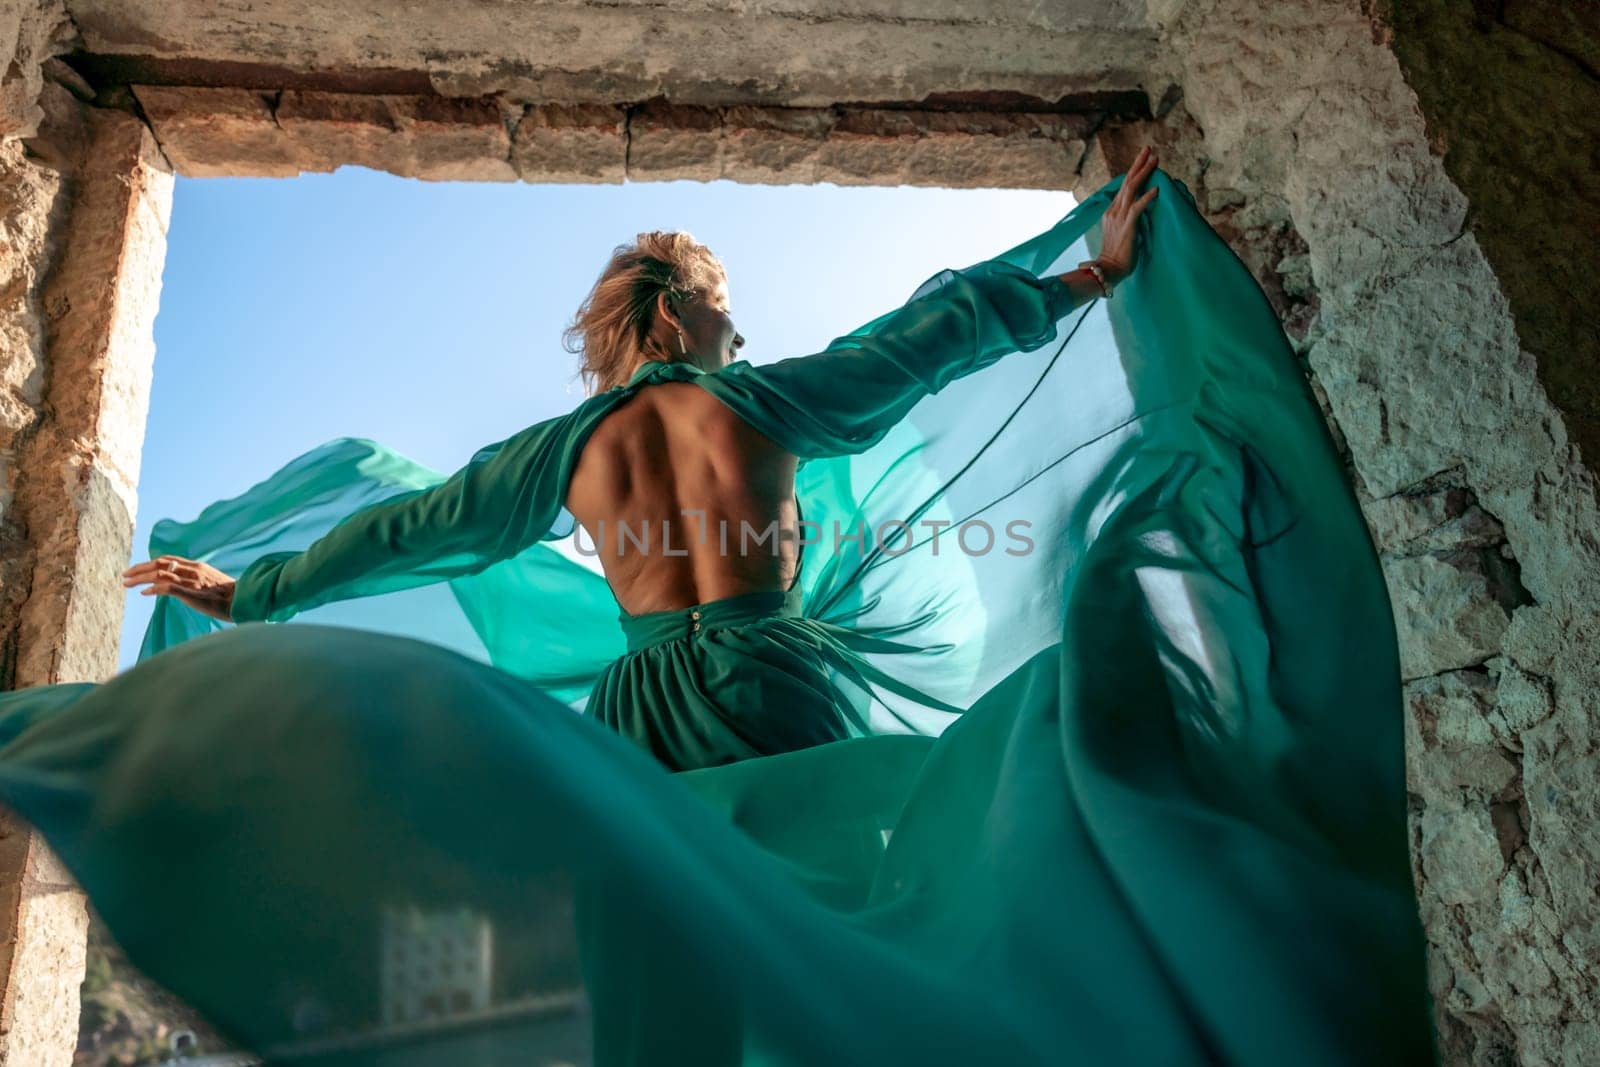 Rear view of a happy blonde woman in a long mint dress posing against the backdrop of the sea in an old building with columns. Girl in nature against the blue sky